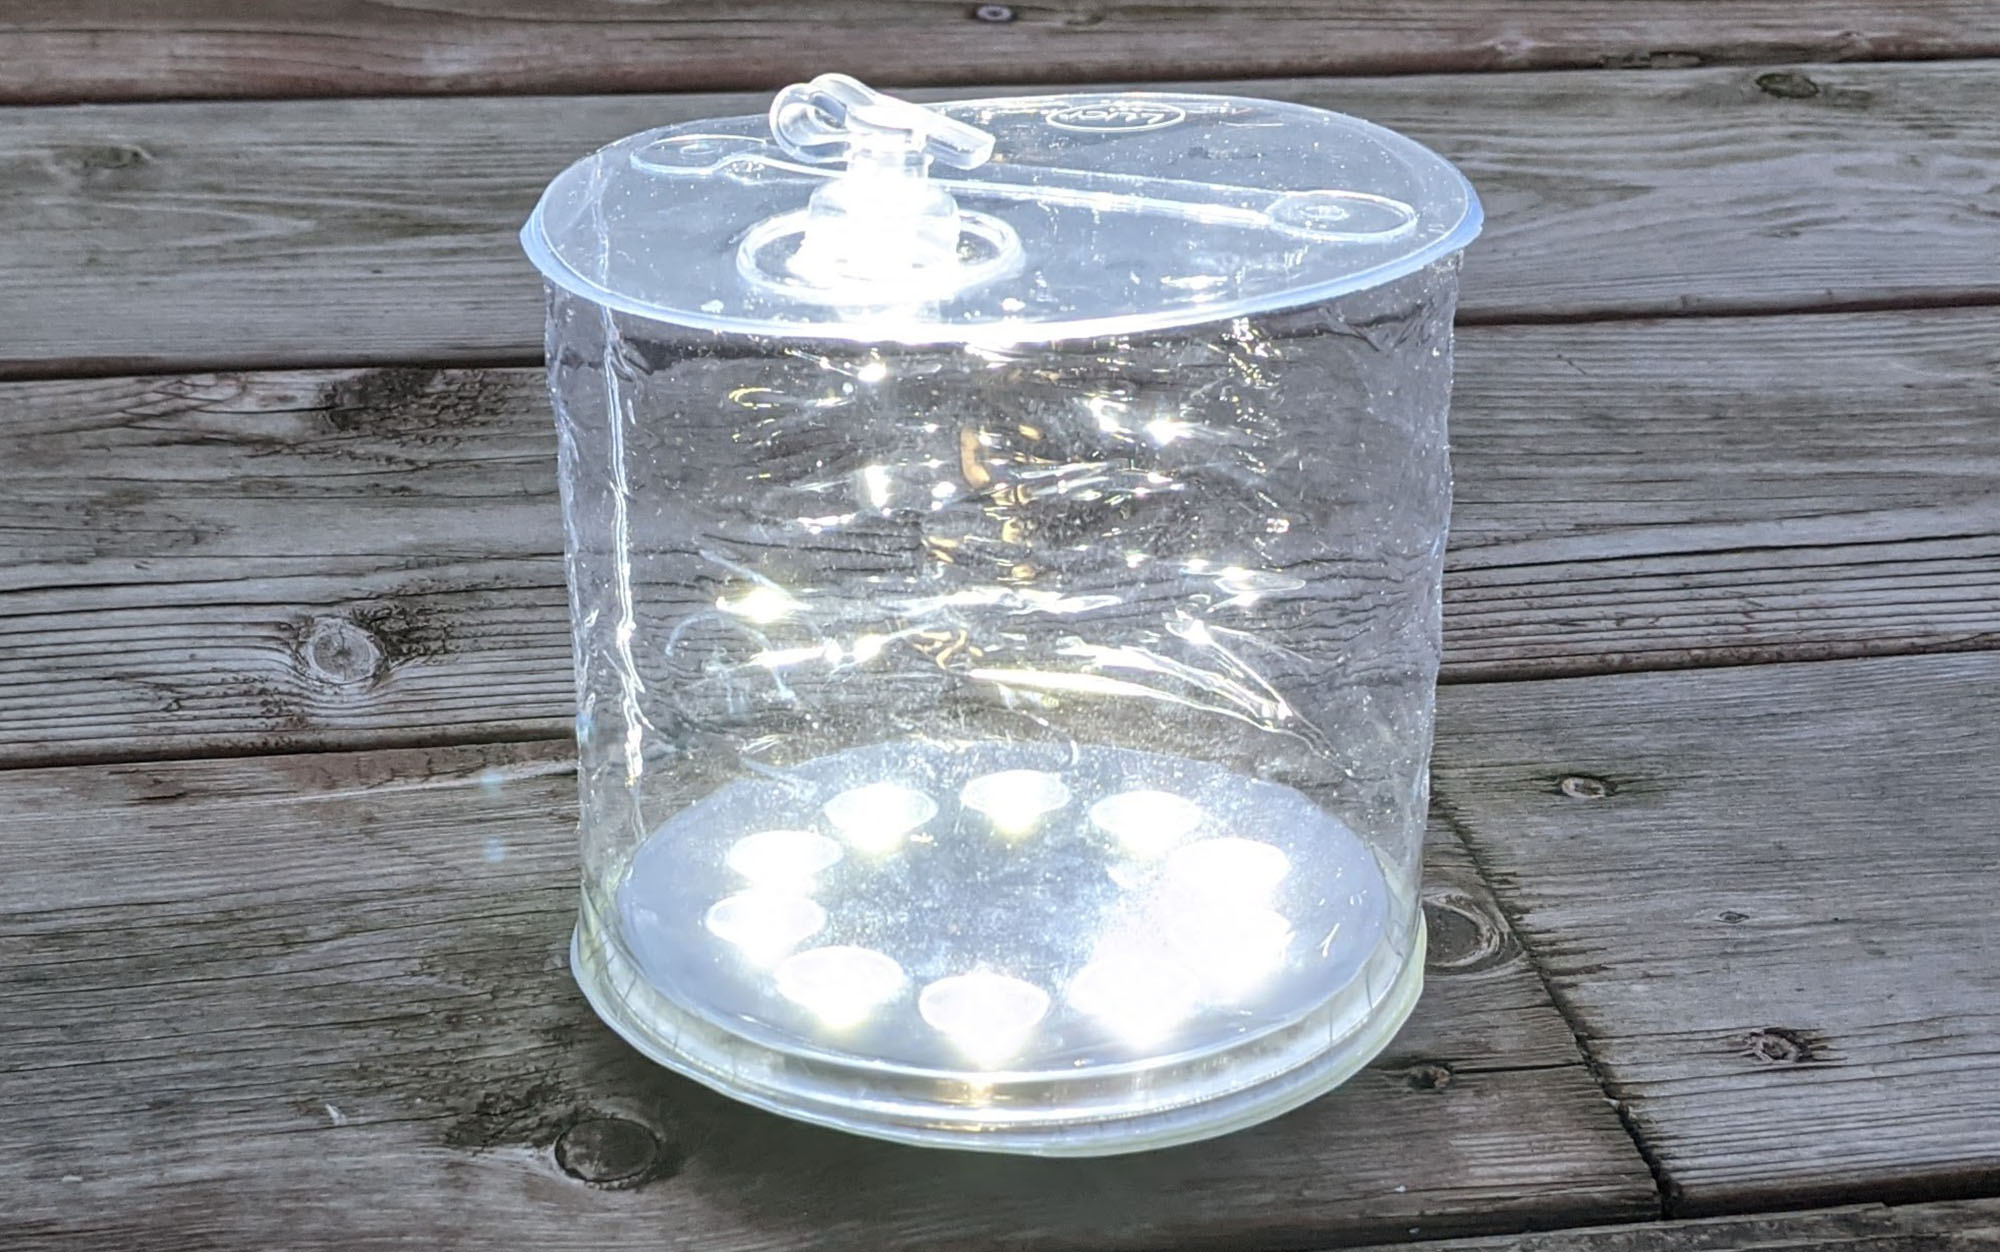 The MPOWERD Luci Outdoor 2.0 is the best budget camping lantern.